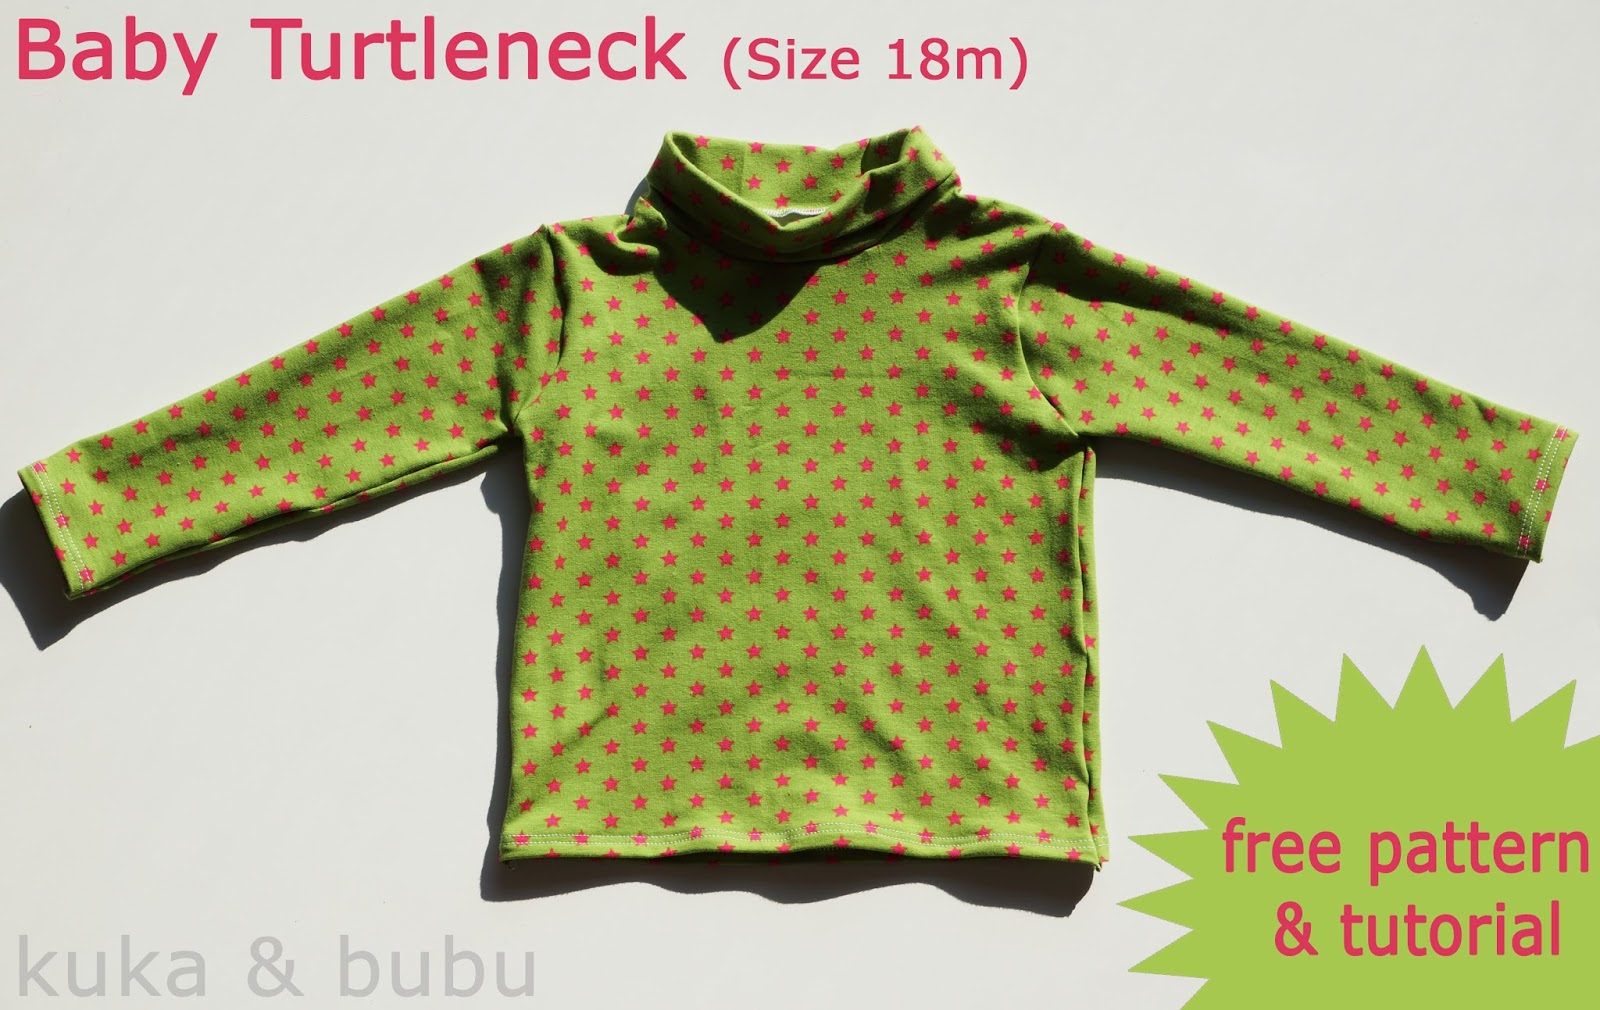 Turtleneck for babies pattern and tutorial